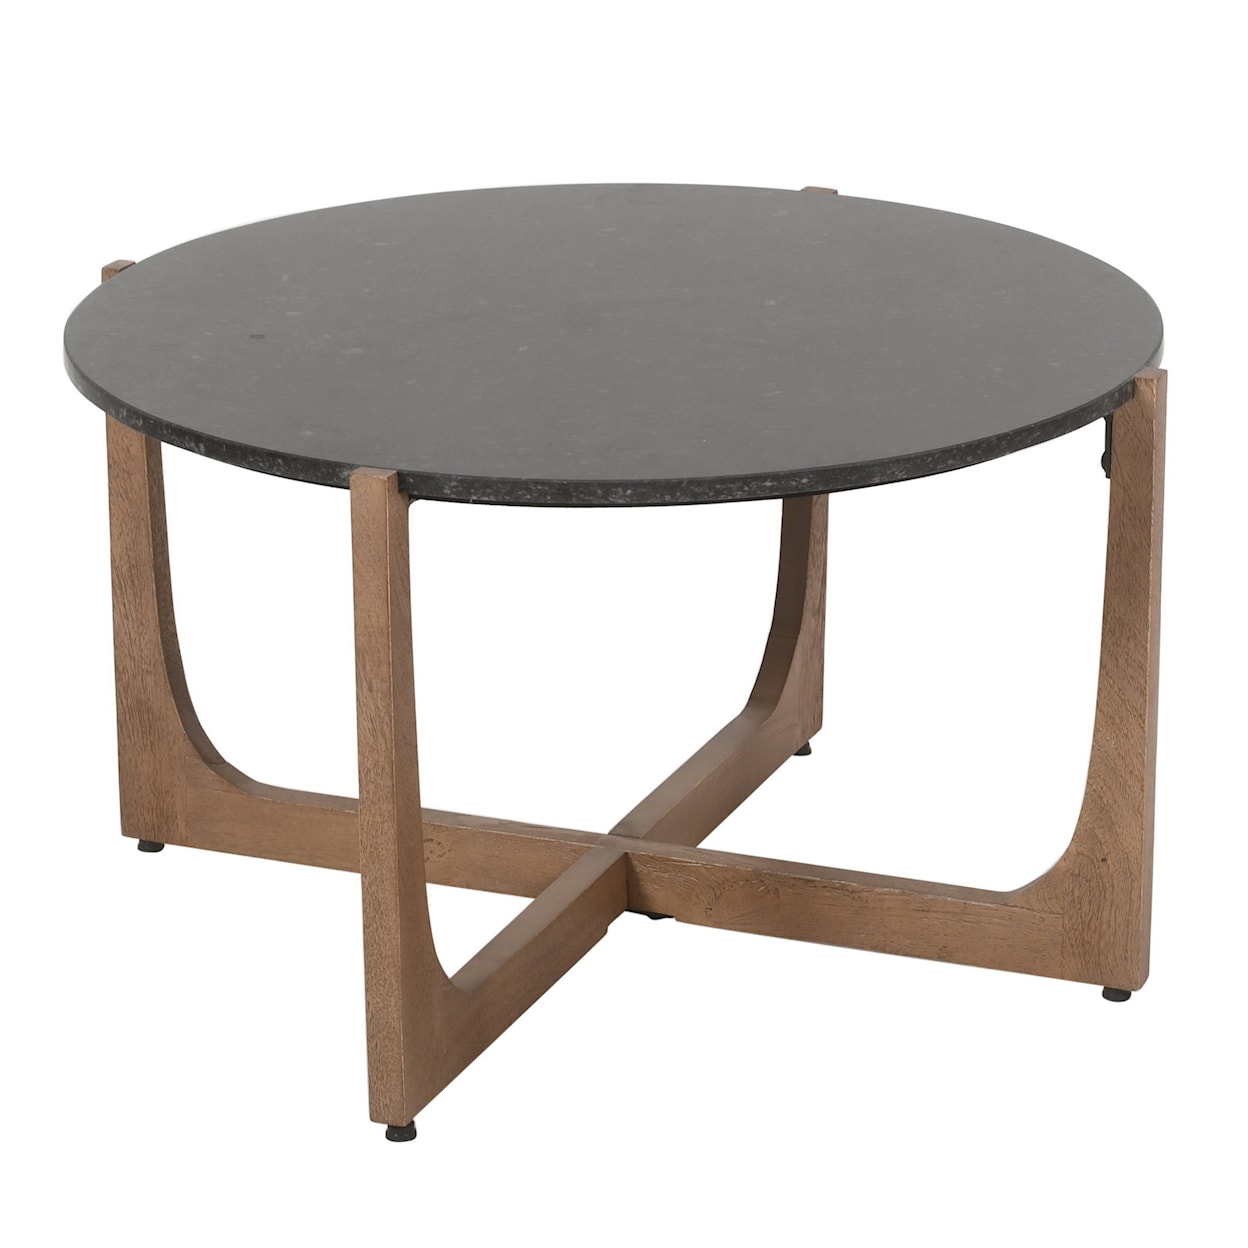 C2C Campbell Cocktail Table